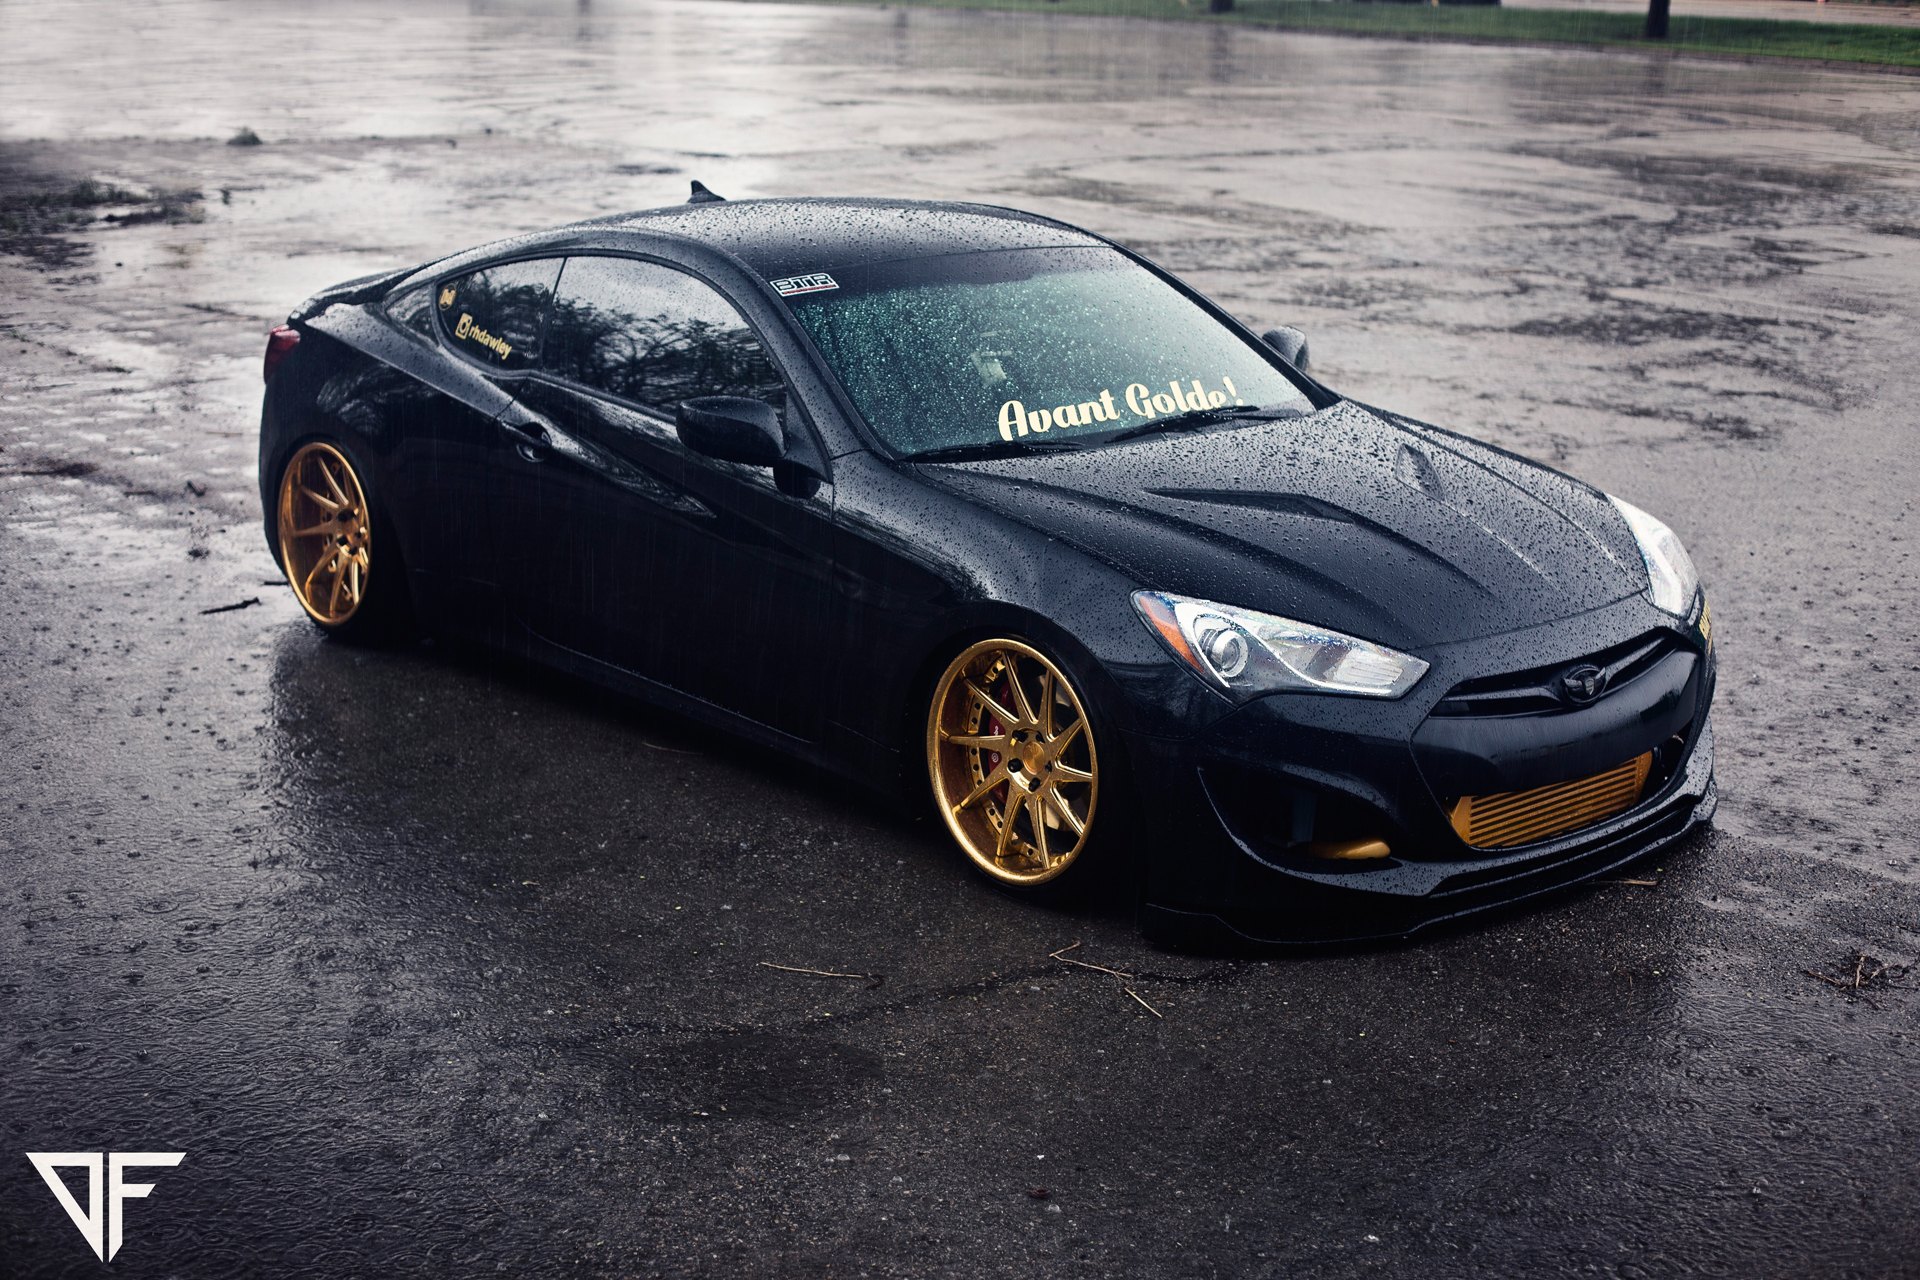 Hyundai Genesis Coupe With a Face Lift - Photo by Avant Garde